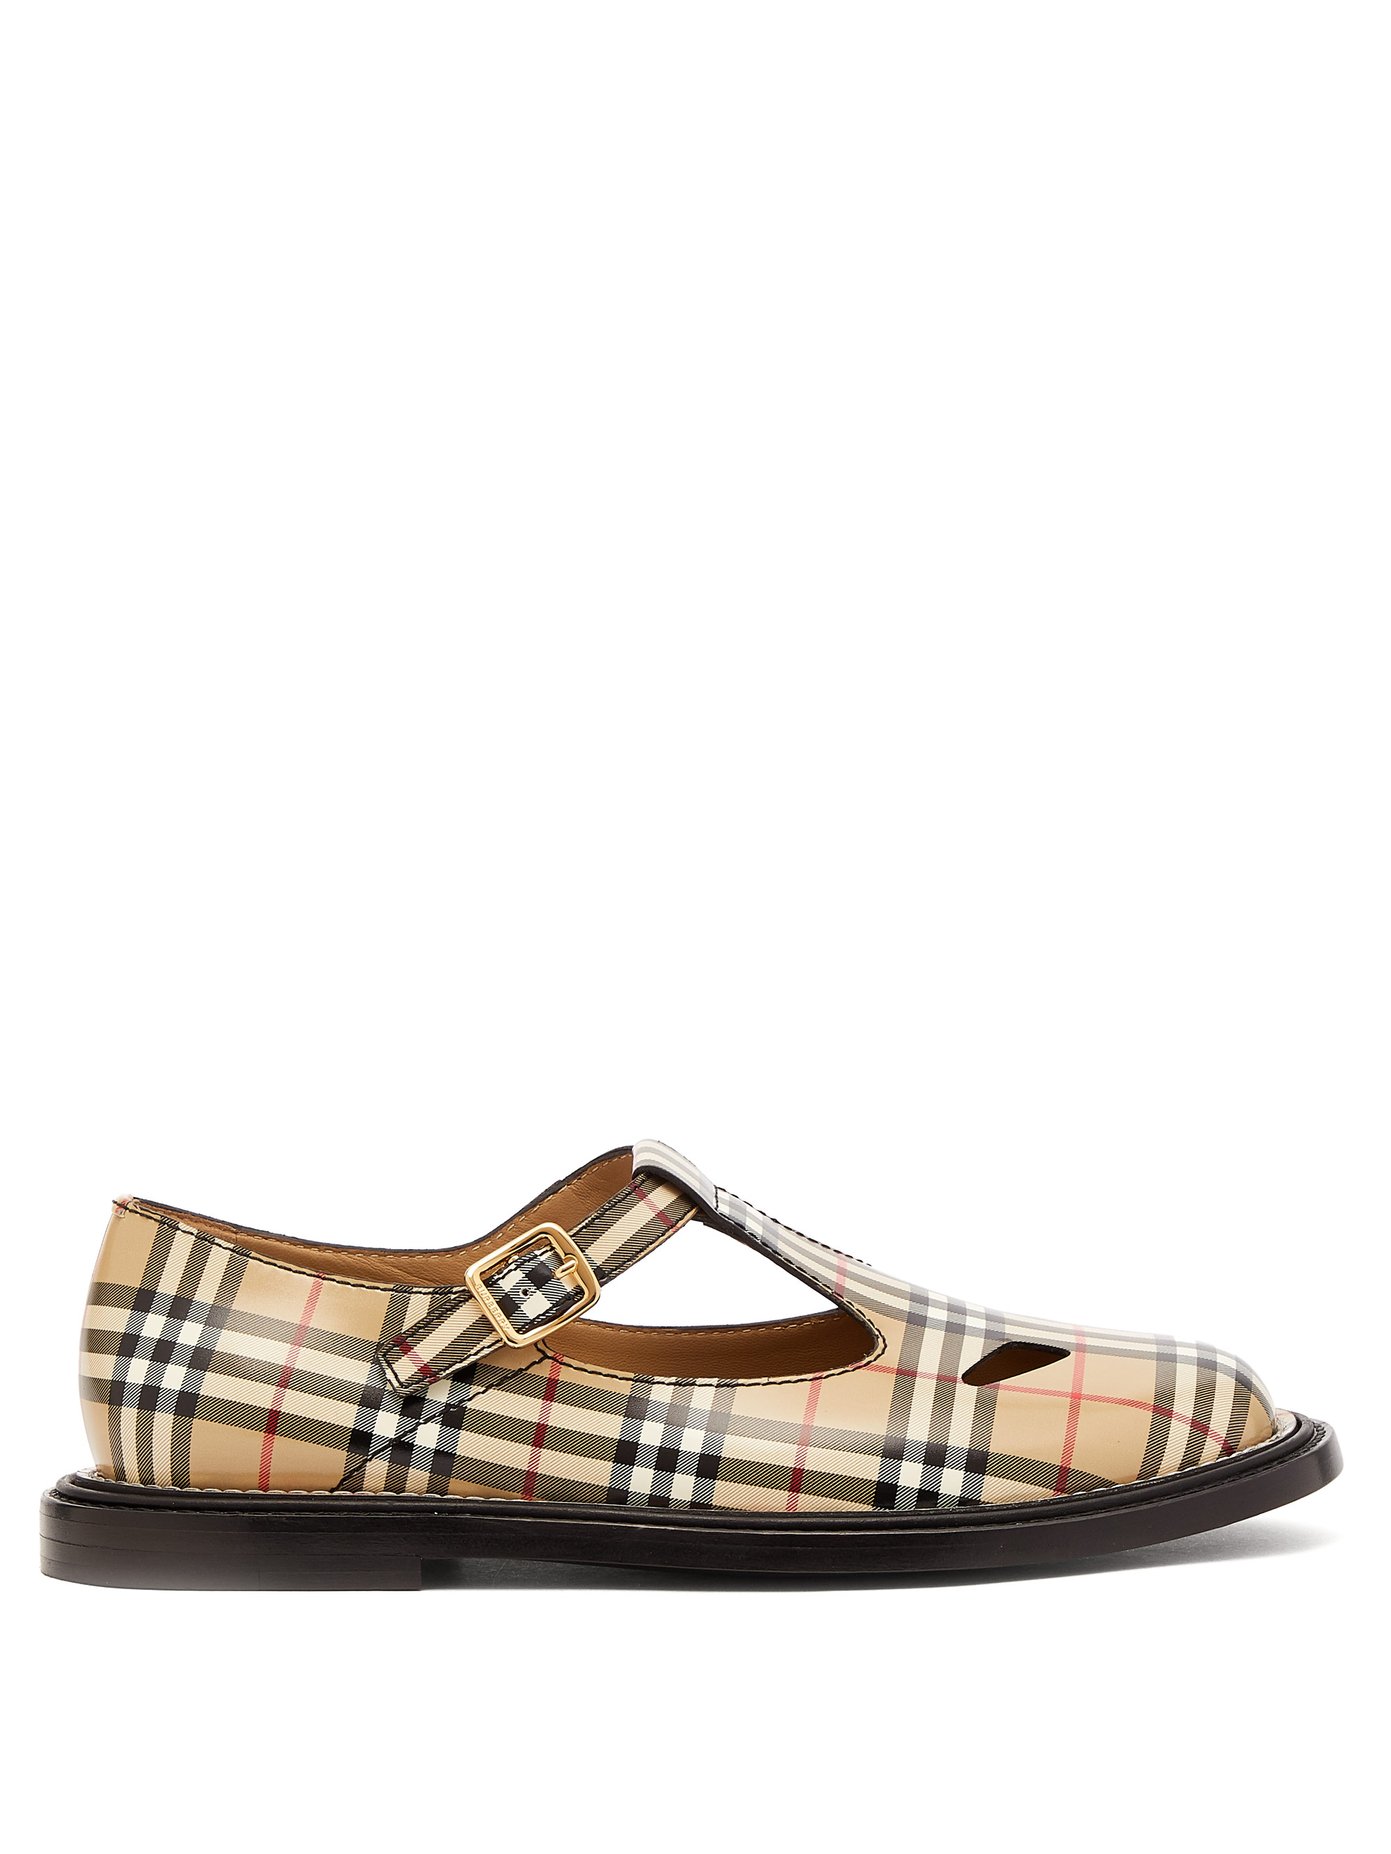 buy burberry shoes